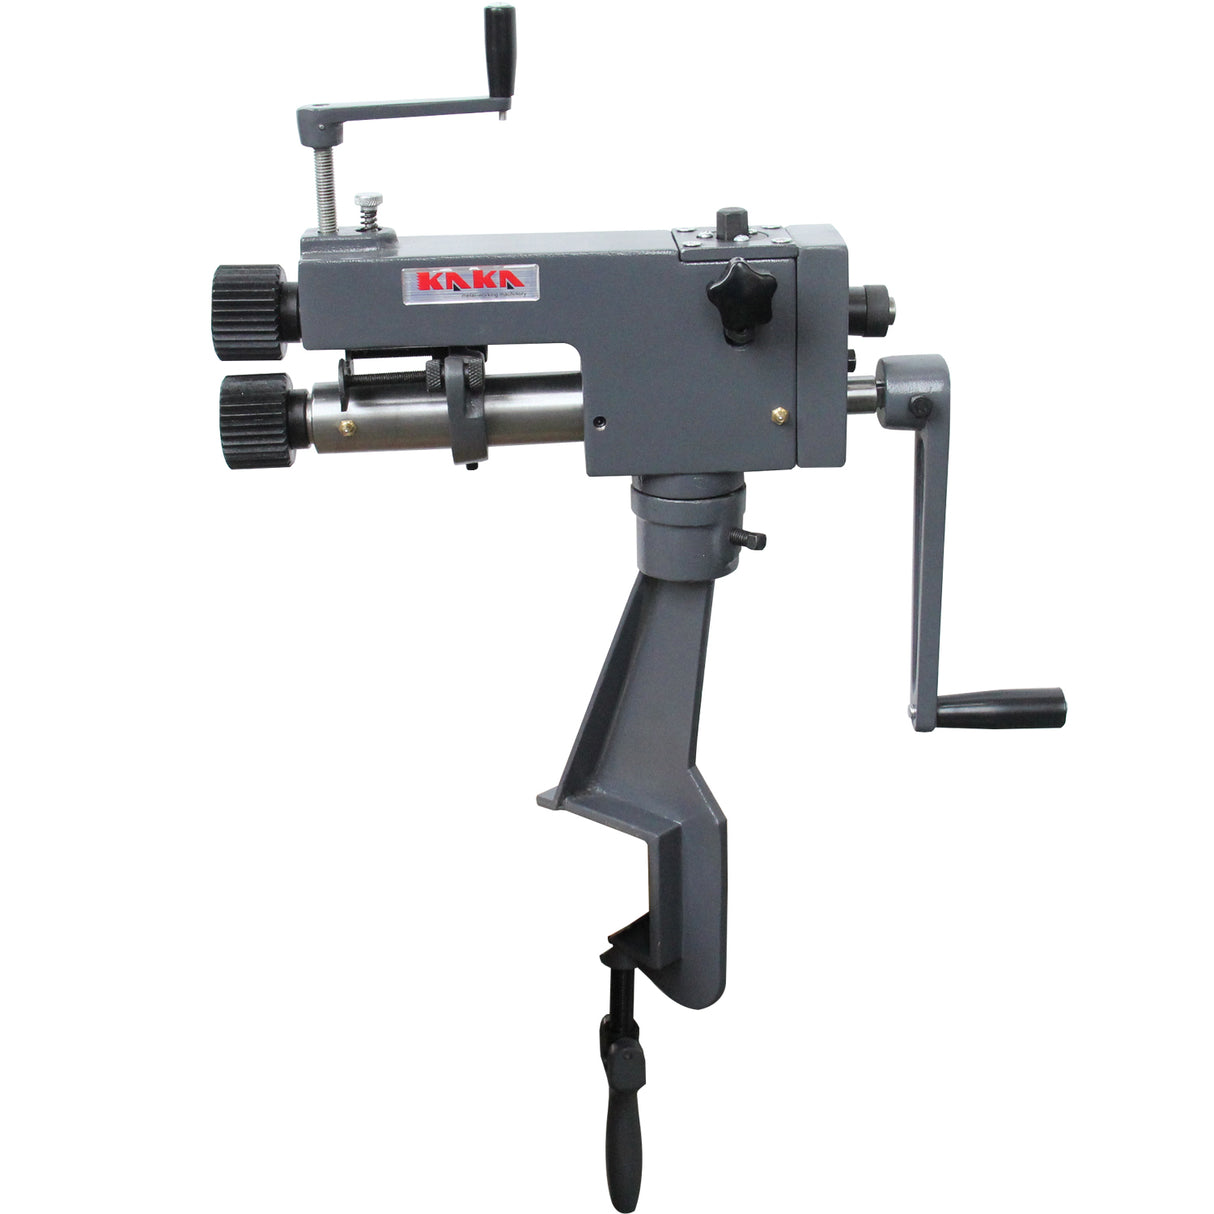 Kaka Industrial RM-08,7-in throat depth,22 gauge mild steel capacity,Sheet Metal Rotary Forming Machine, roller head can swivel and pivot.High Adjustability HAVC Tools Fabrication Bead Rolling Machine